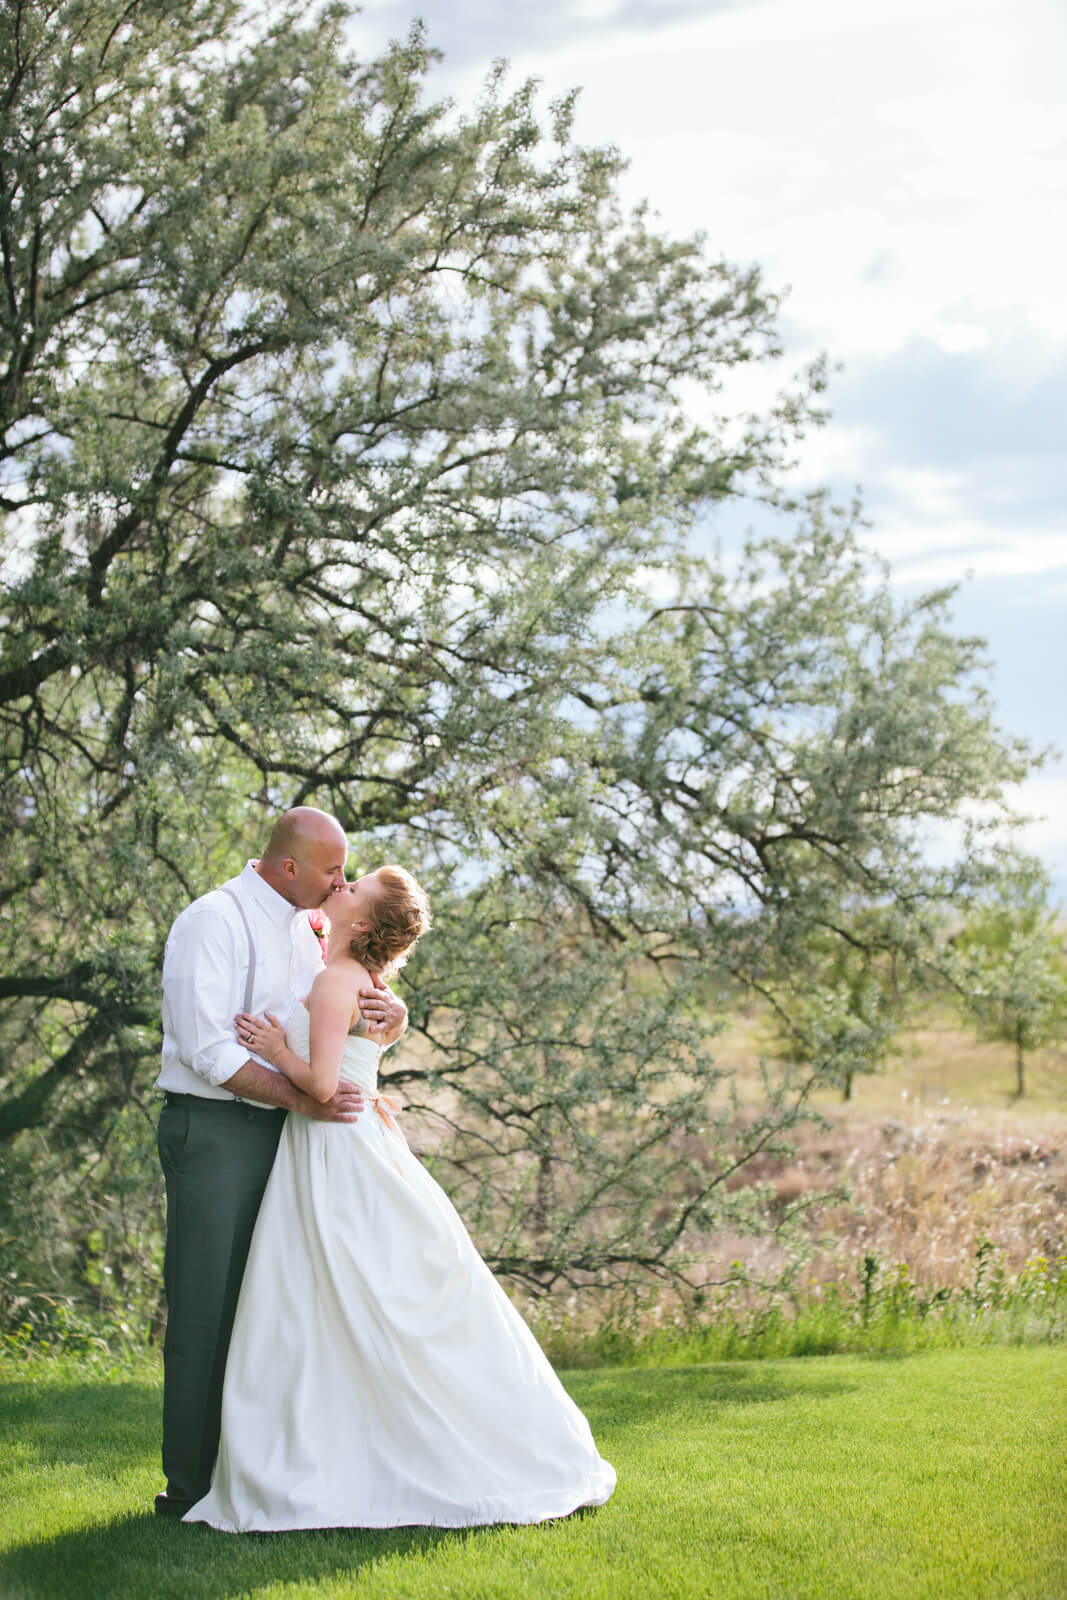 A bride and groom kiss in front of a tree during their wedding at the Lakeside Ranch in Helena Montana